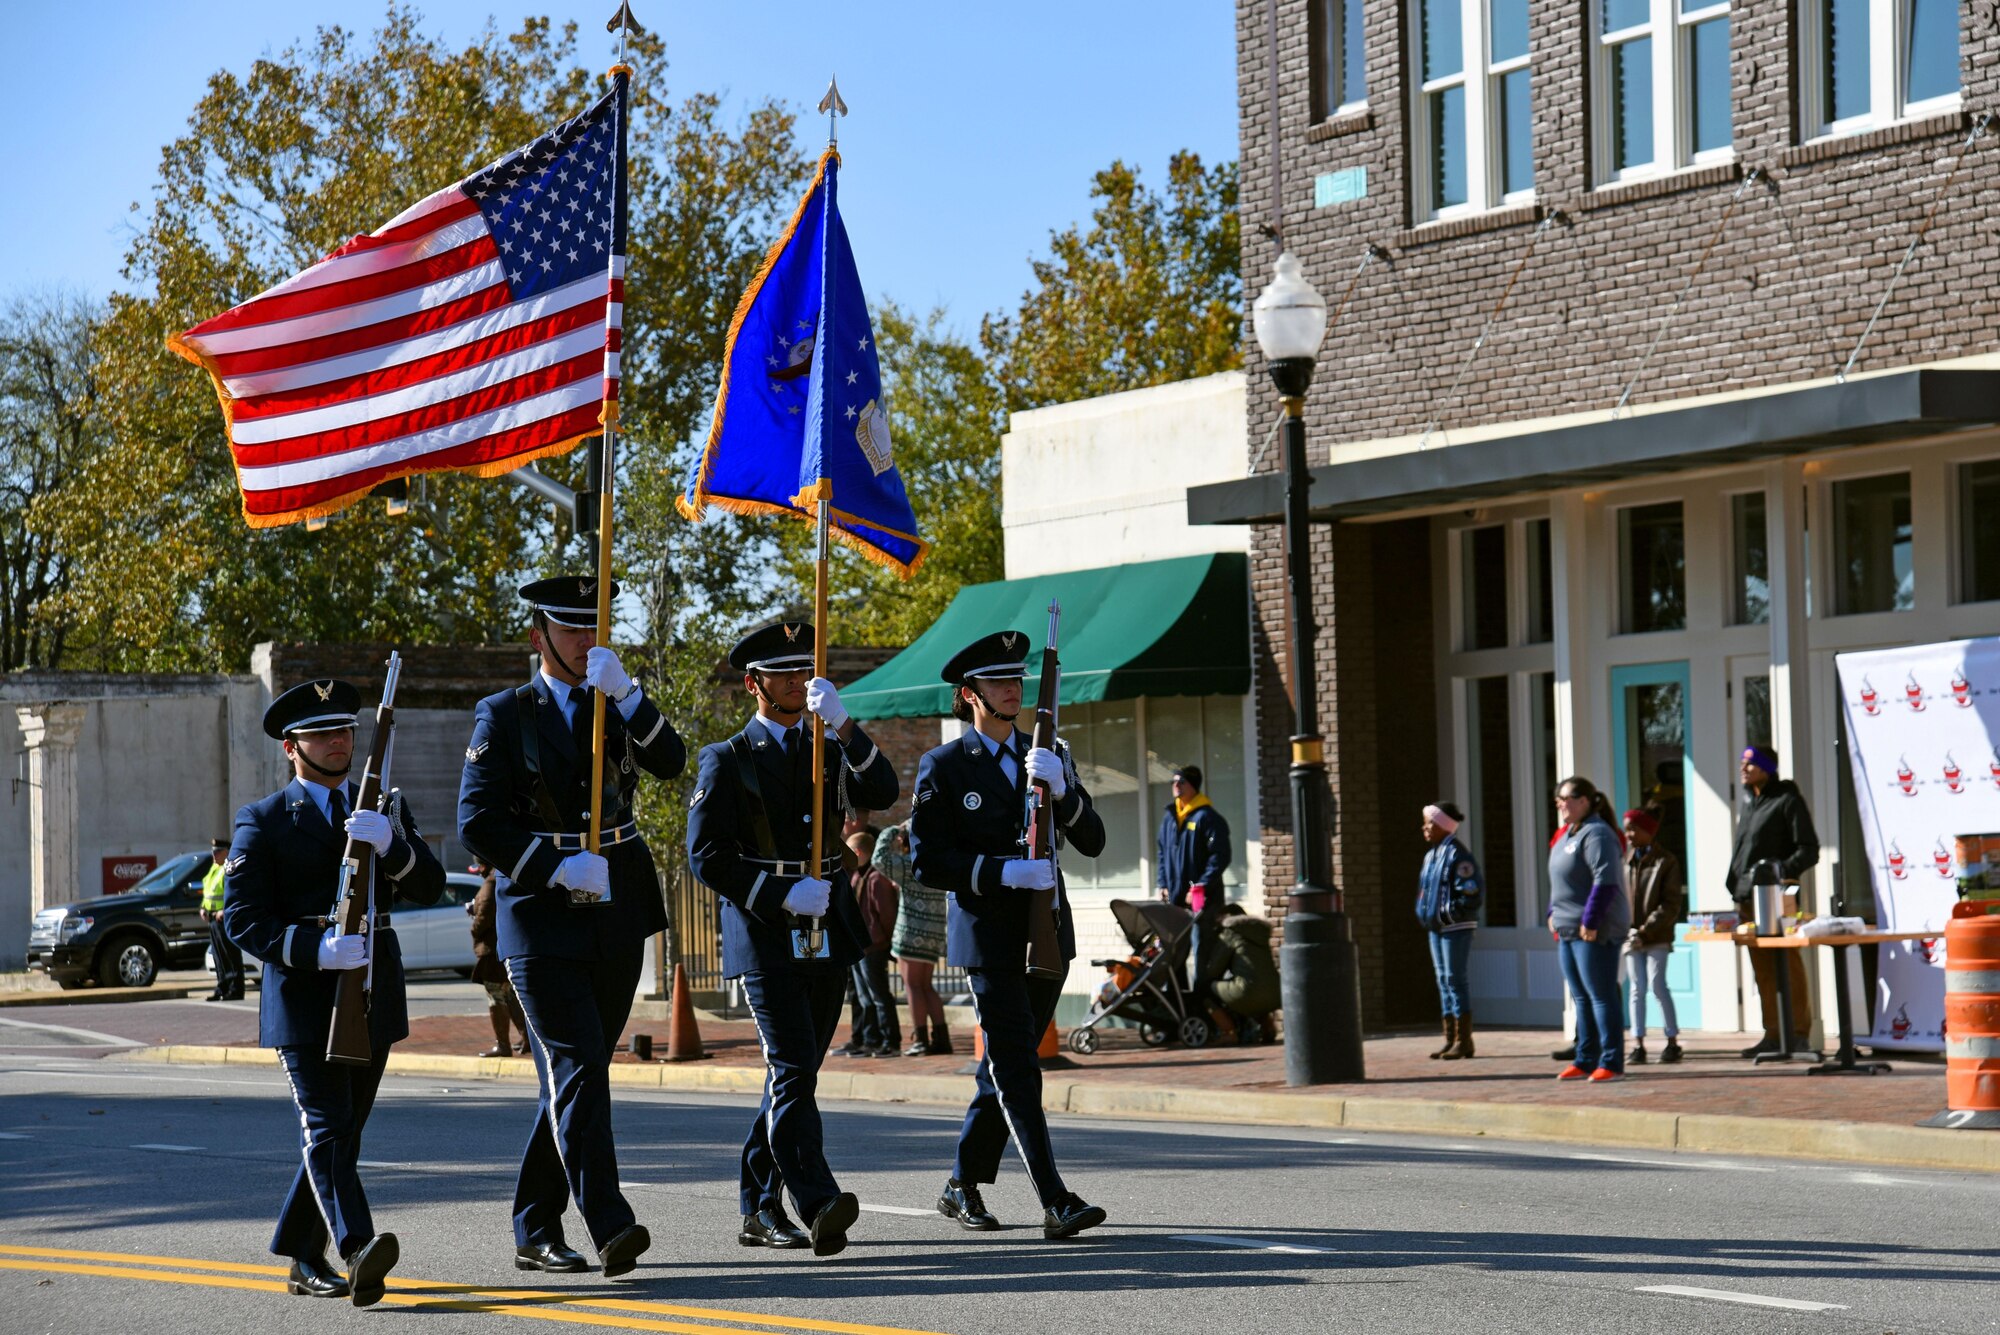 U.S. Airmen assigned to the 20th Force Support Squadron Honor Guard march during a Veterans Day Celebration parade in Sumter, South Carolina, Nov. 11, 2017.